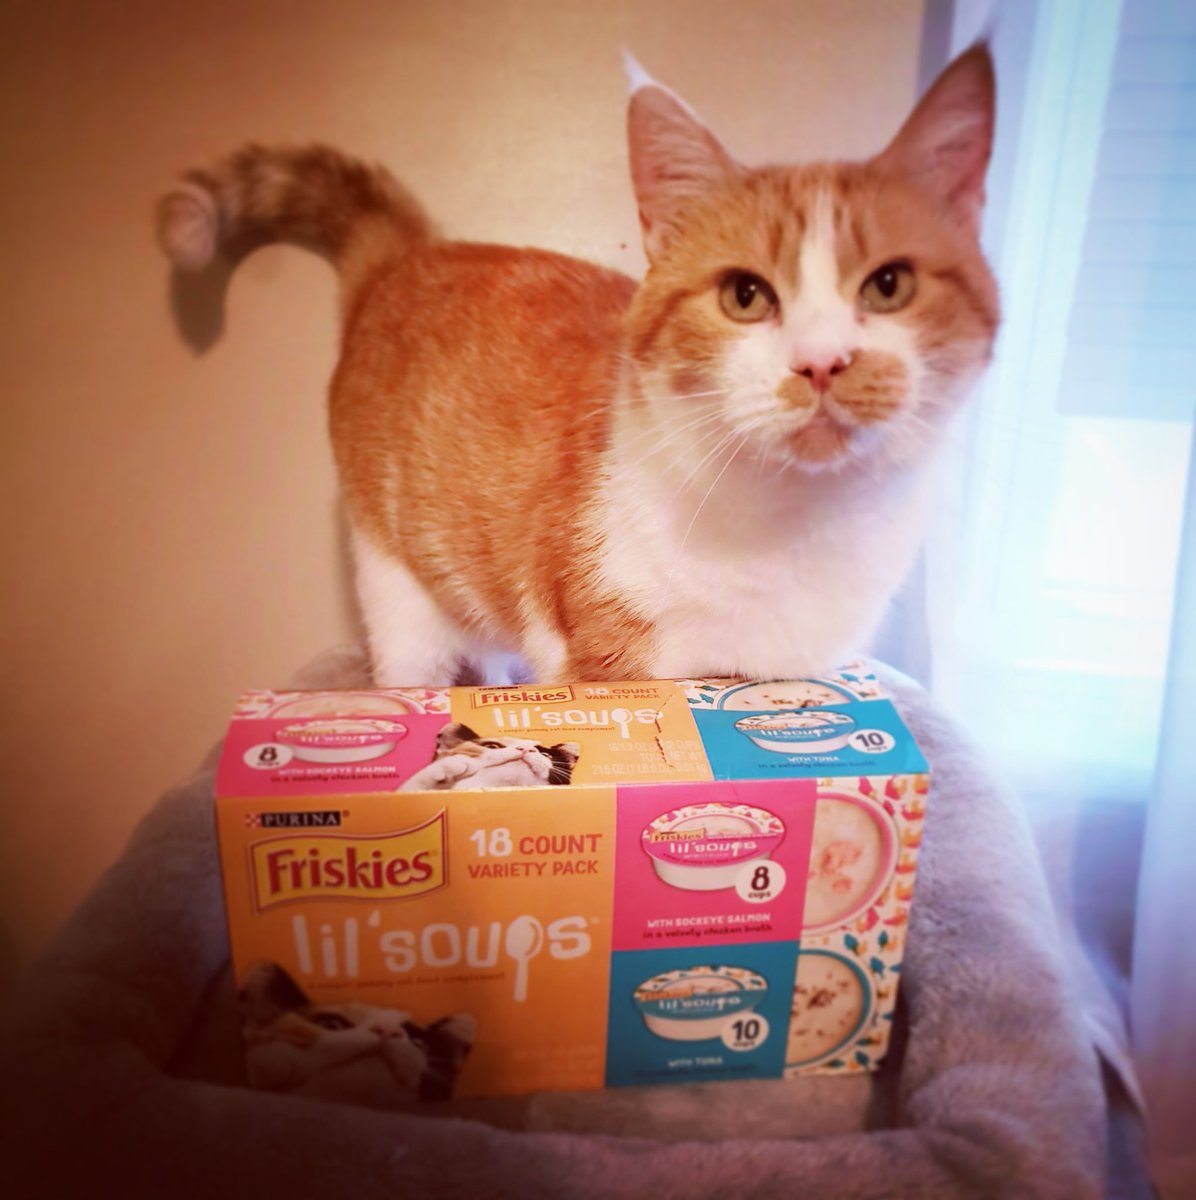 Penny ❤s @Friskies lil'soups! #happycathappylife #catmomsofTwitter